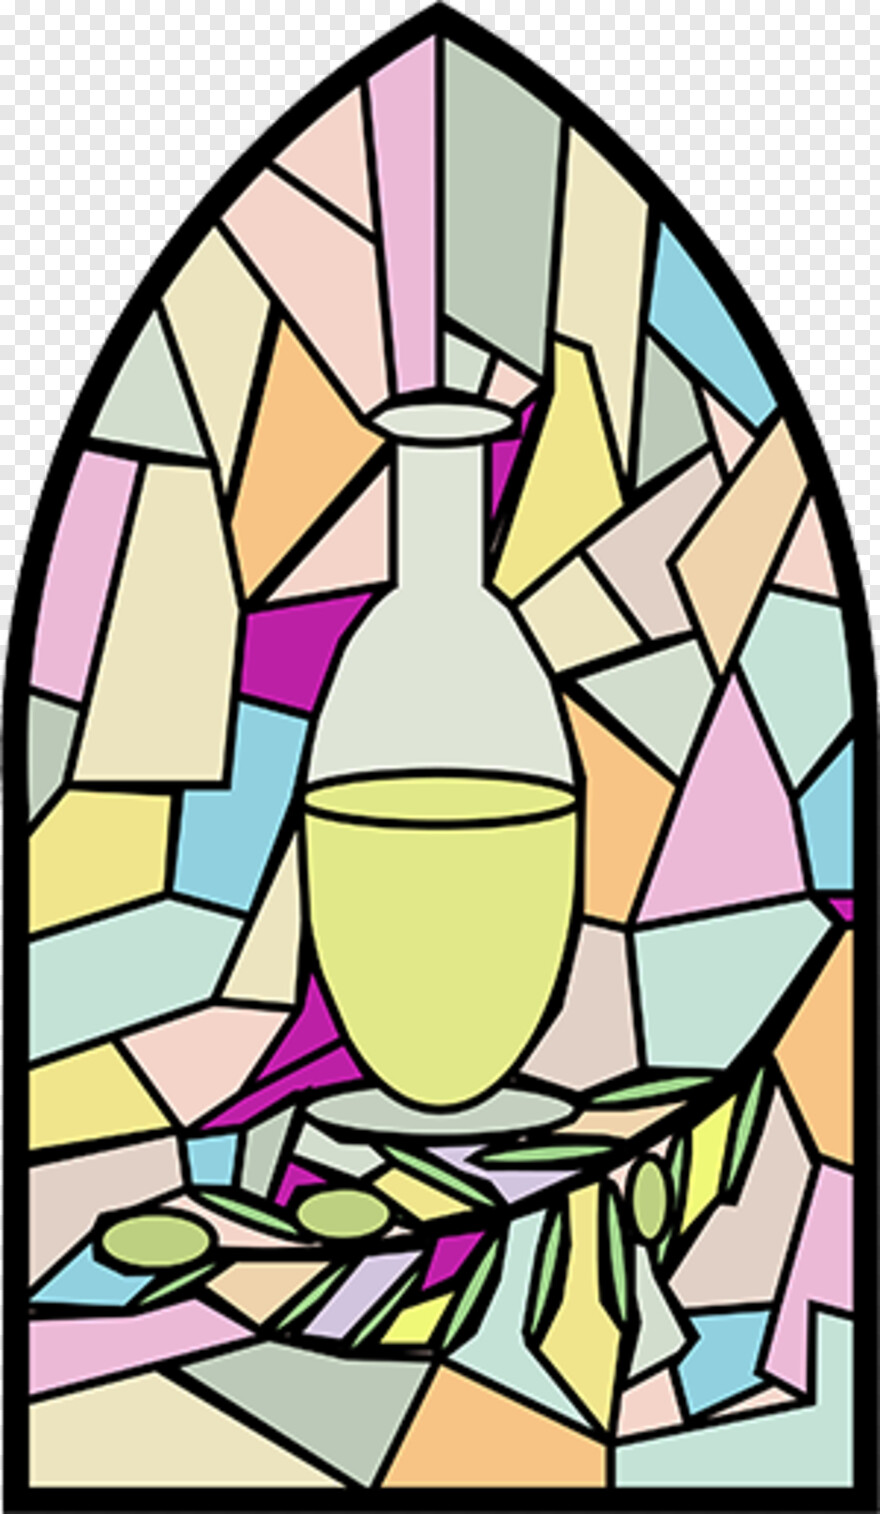 stained-glass # 795385